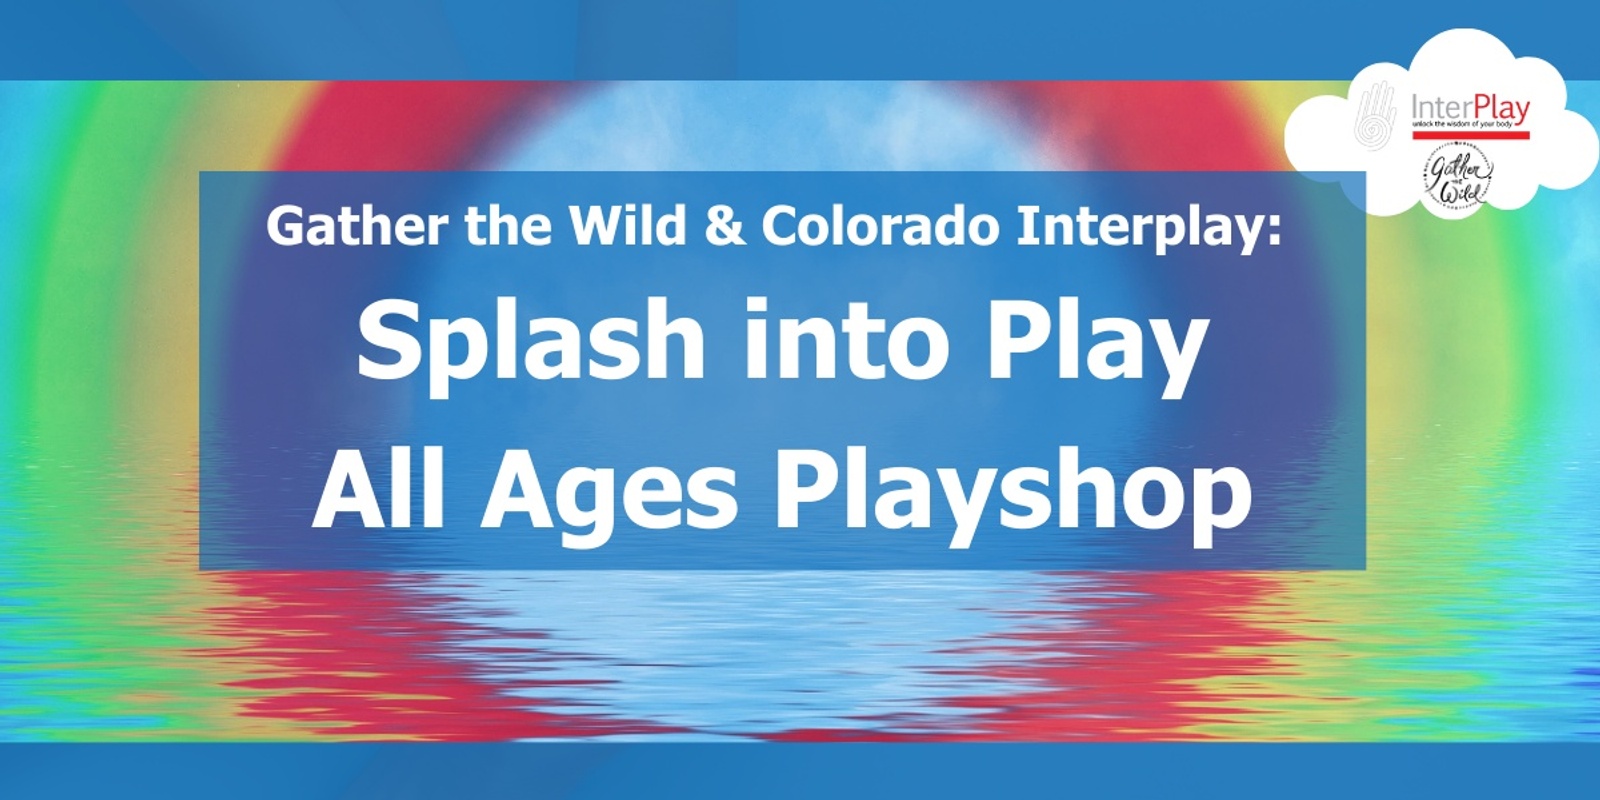 Banner image for Gather the Wild & InterPlay Colorado: Splash into Play!